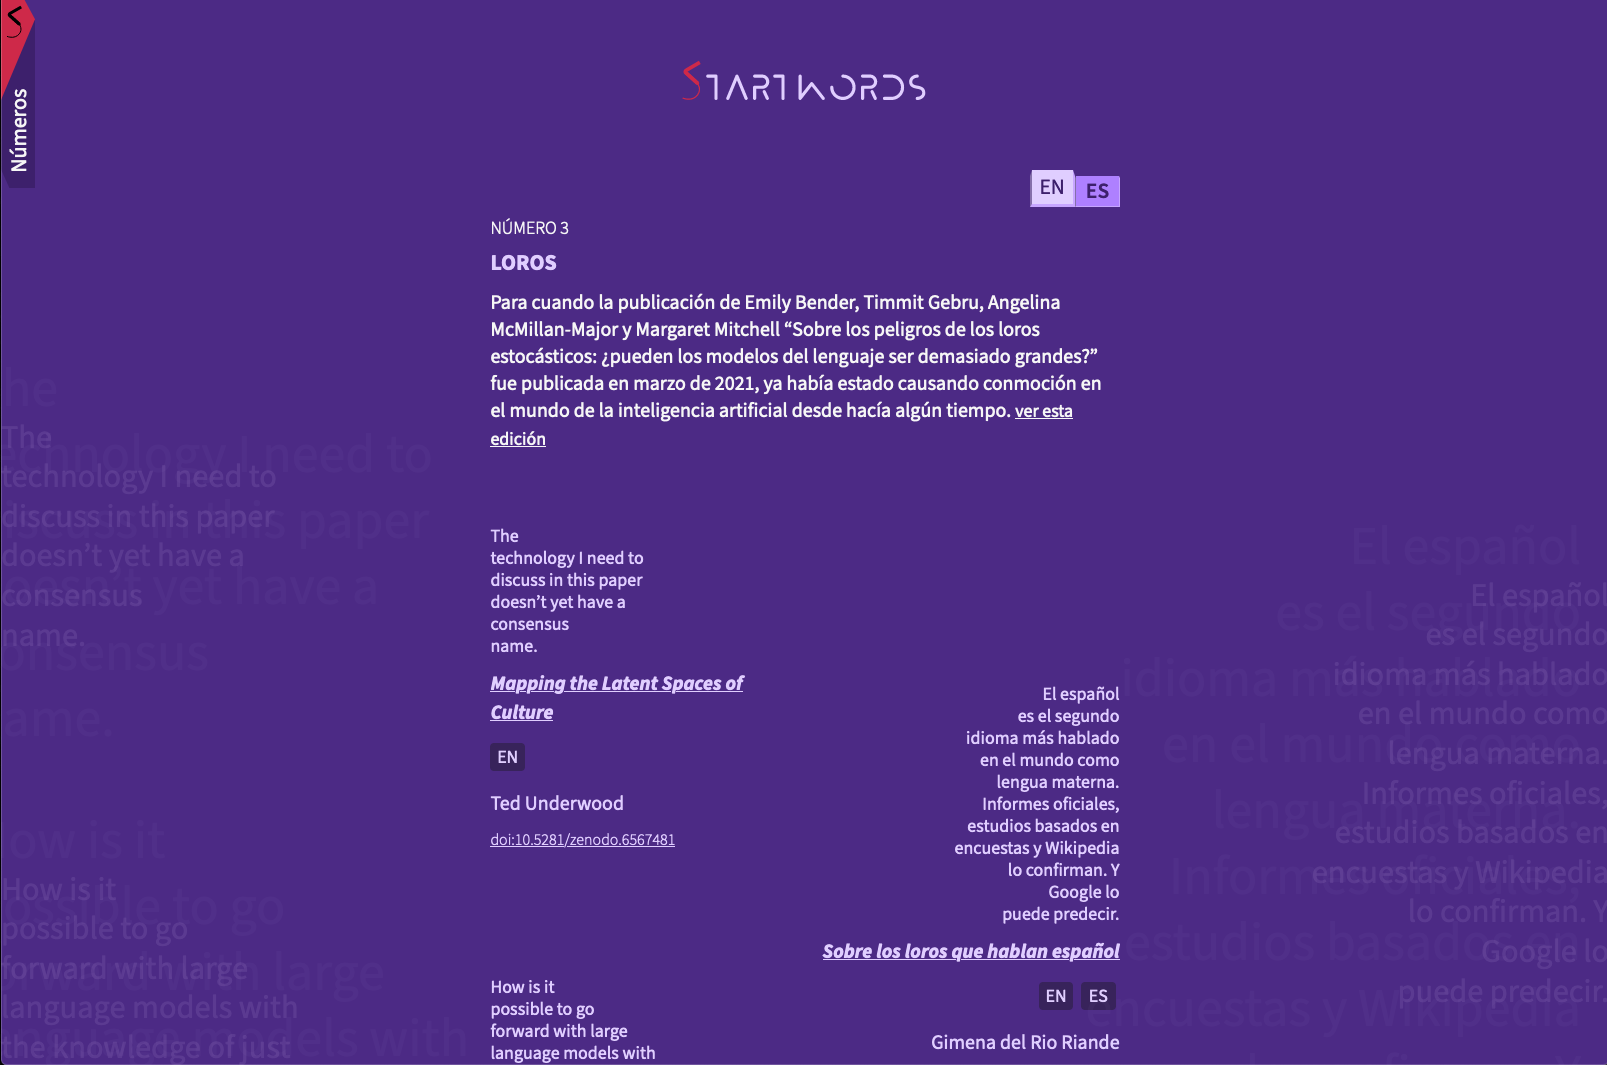 Screenshot of Startwords home page in Spanish with Issue 3 published